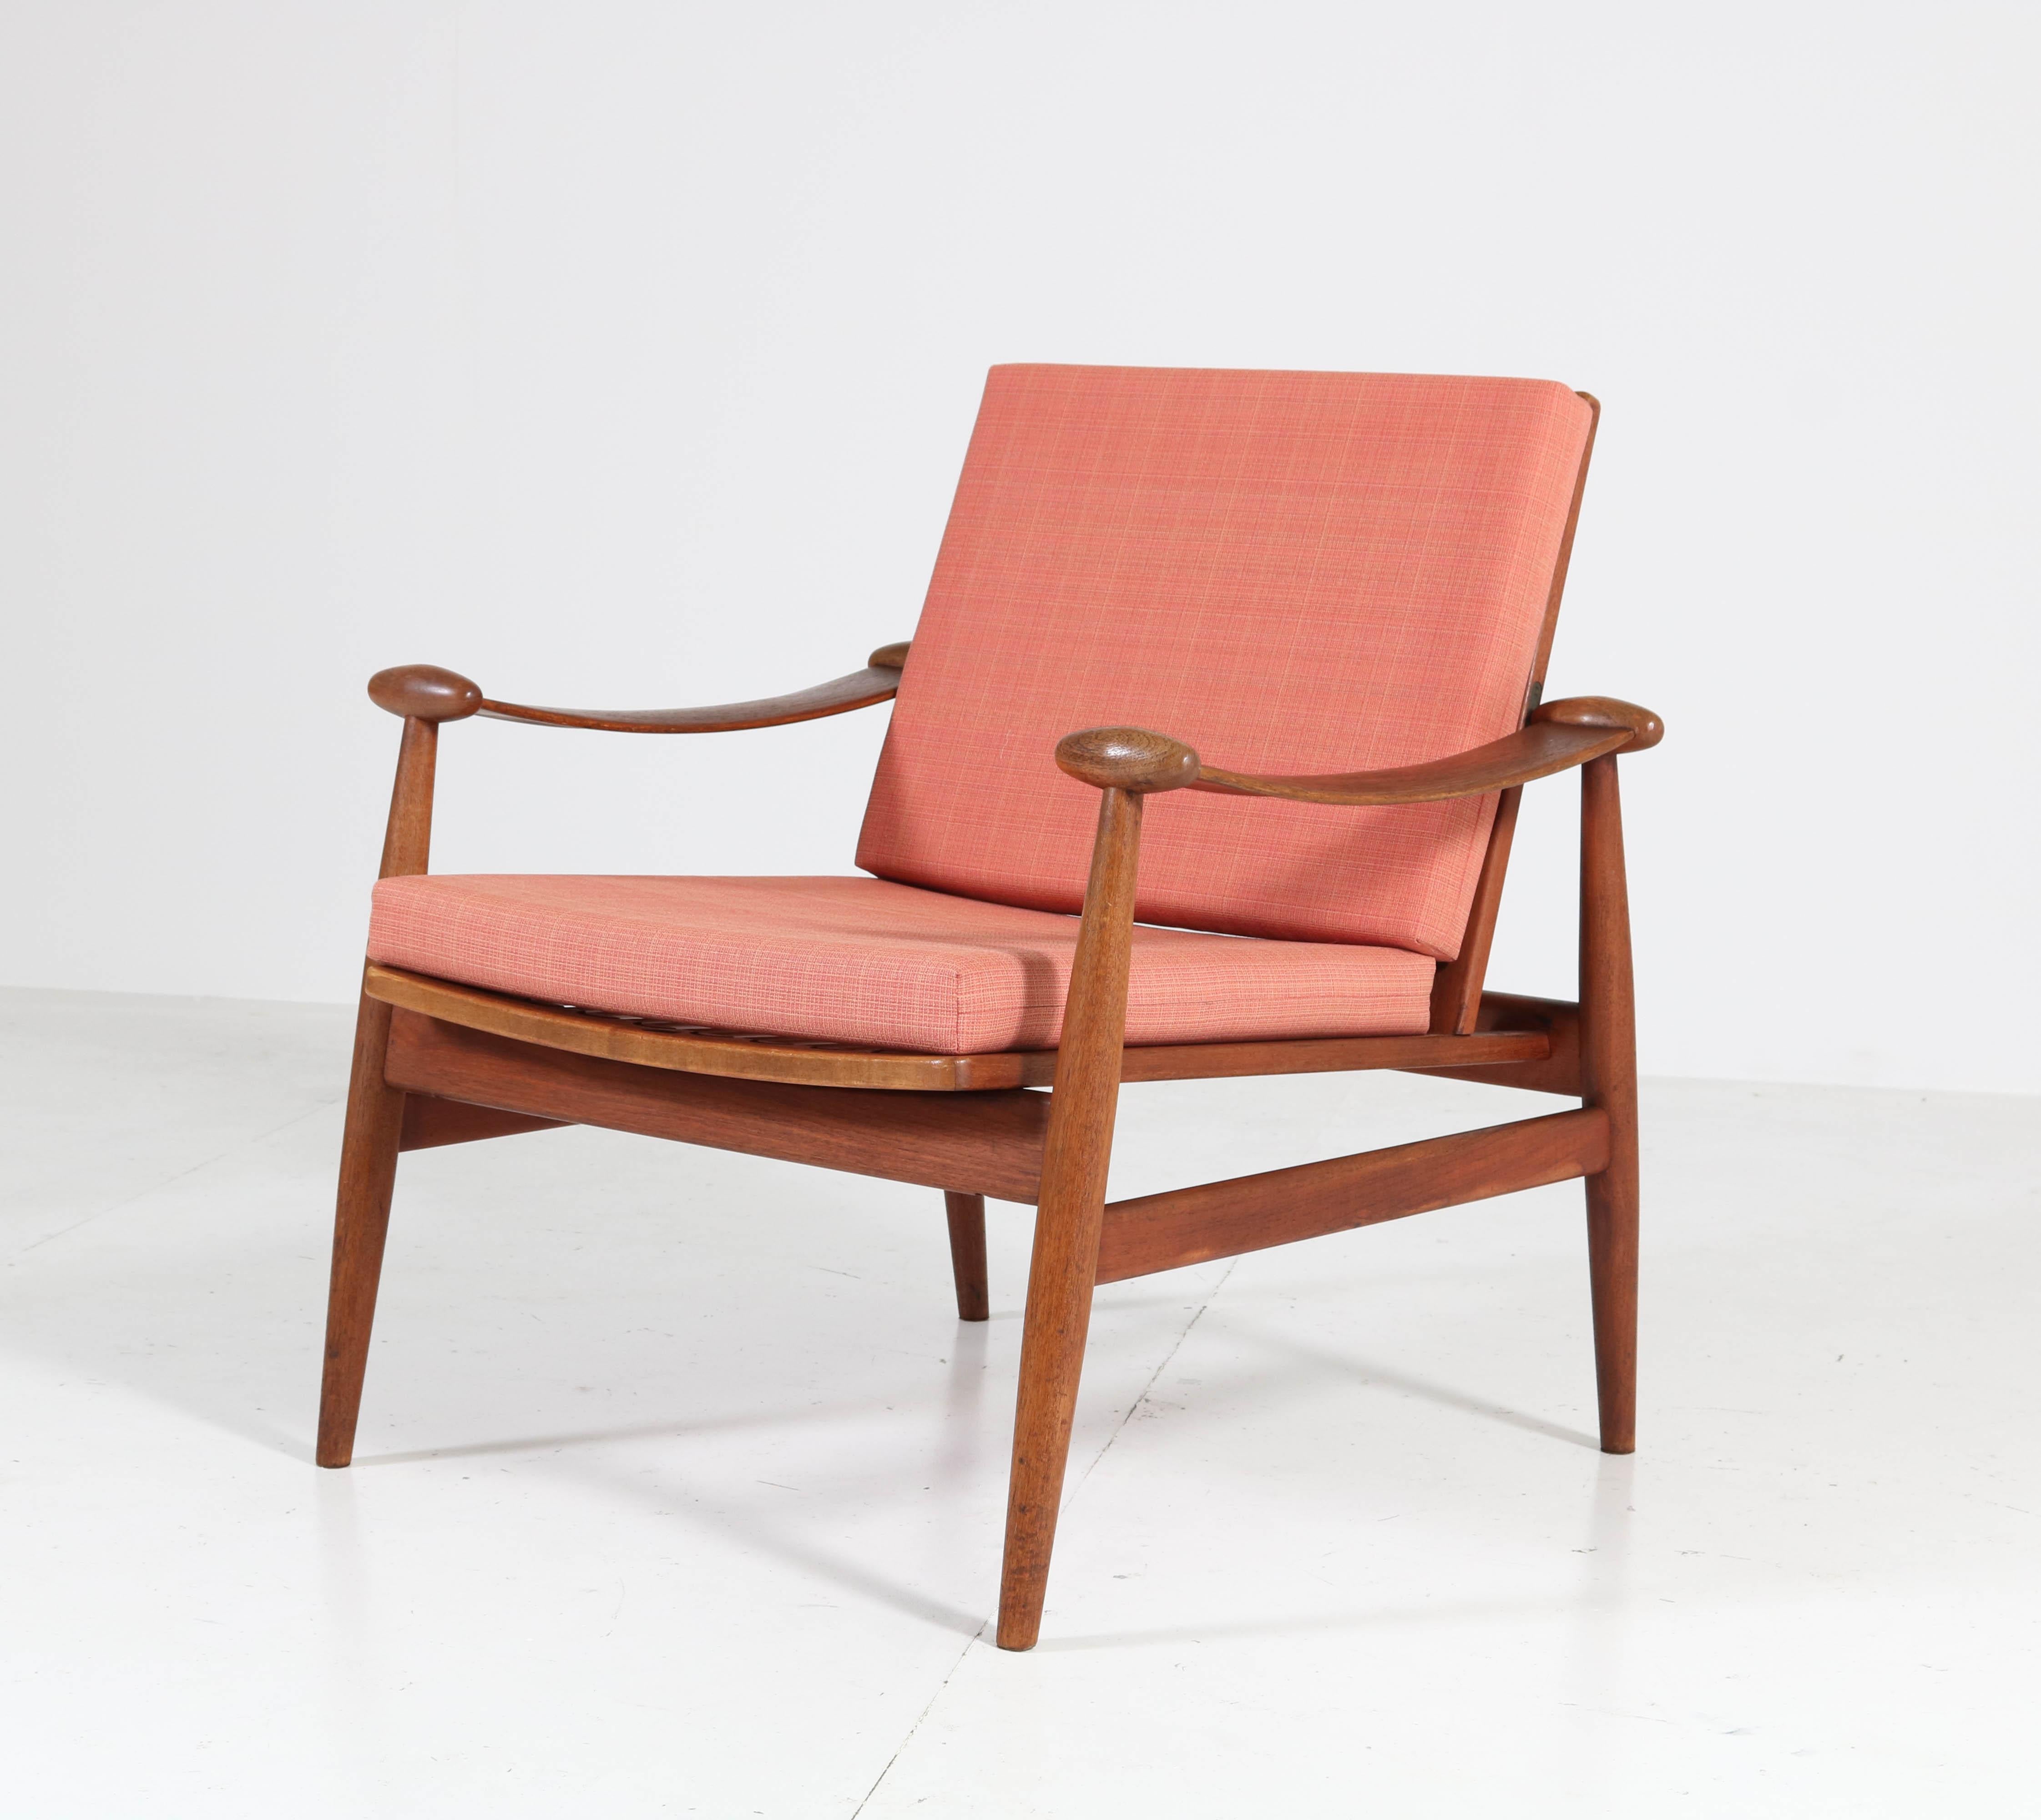 Stunning Mid-Century Modern spade lounge chair.
Design by Finn Juhl for France & Daverkosen model 133.
Solid teak with original upholstery.
Marked with manufacturers tag, see image 4.
In good original condition with minor wear consistent with